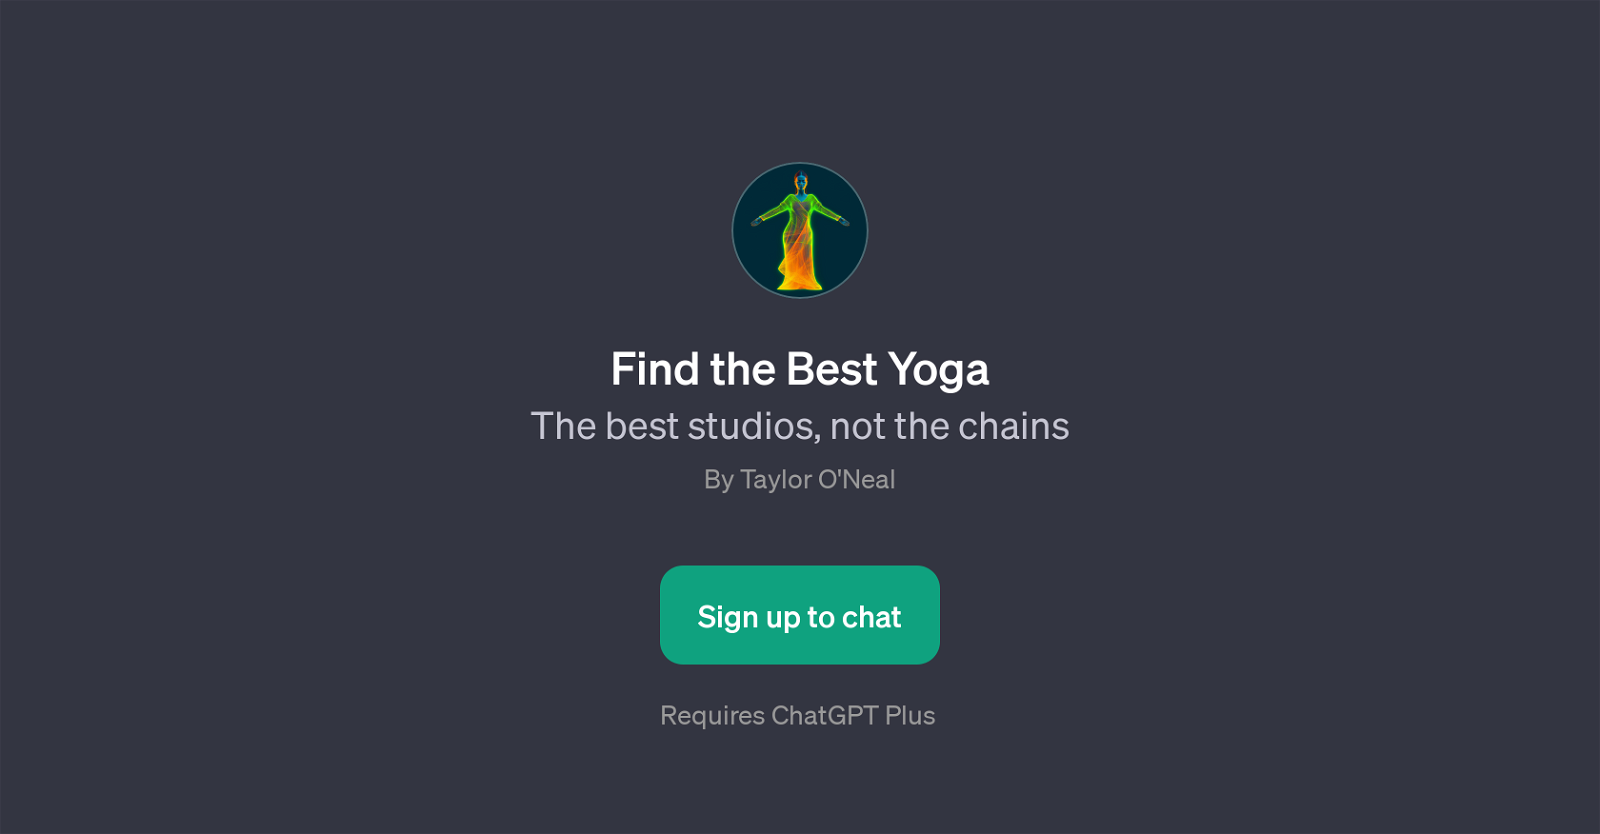 Find the Best Yoga website